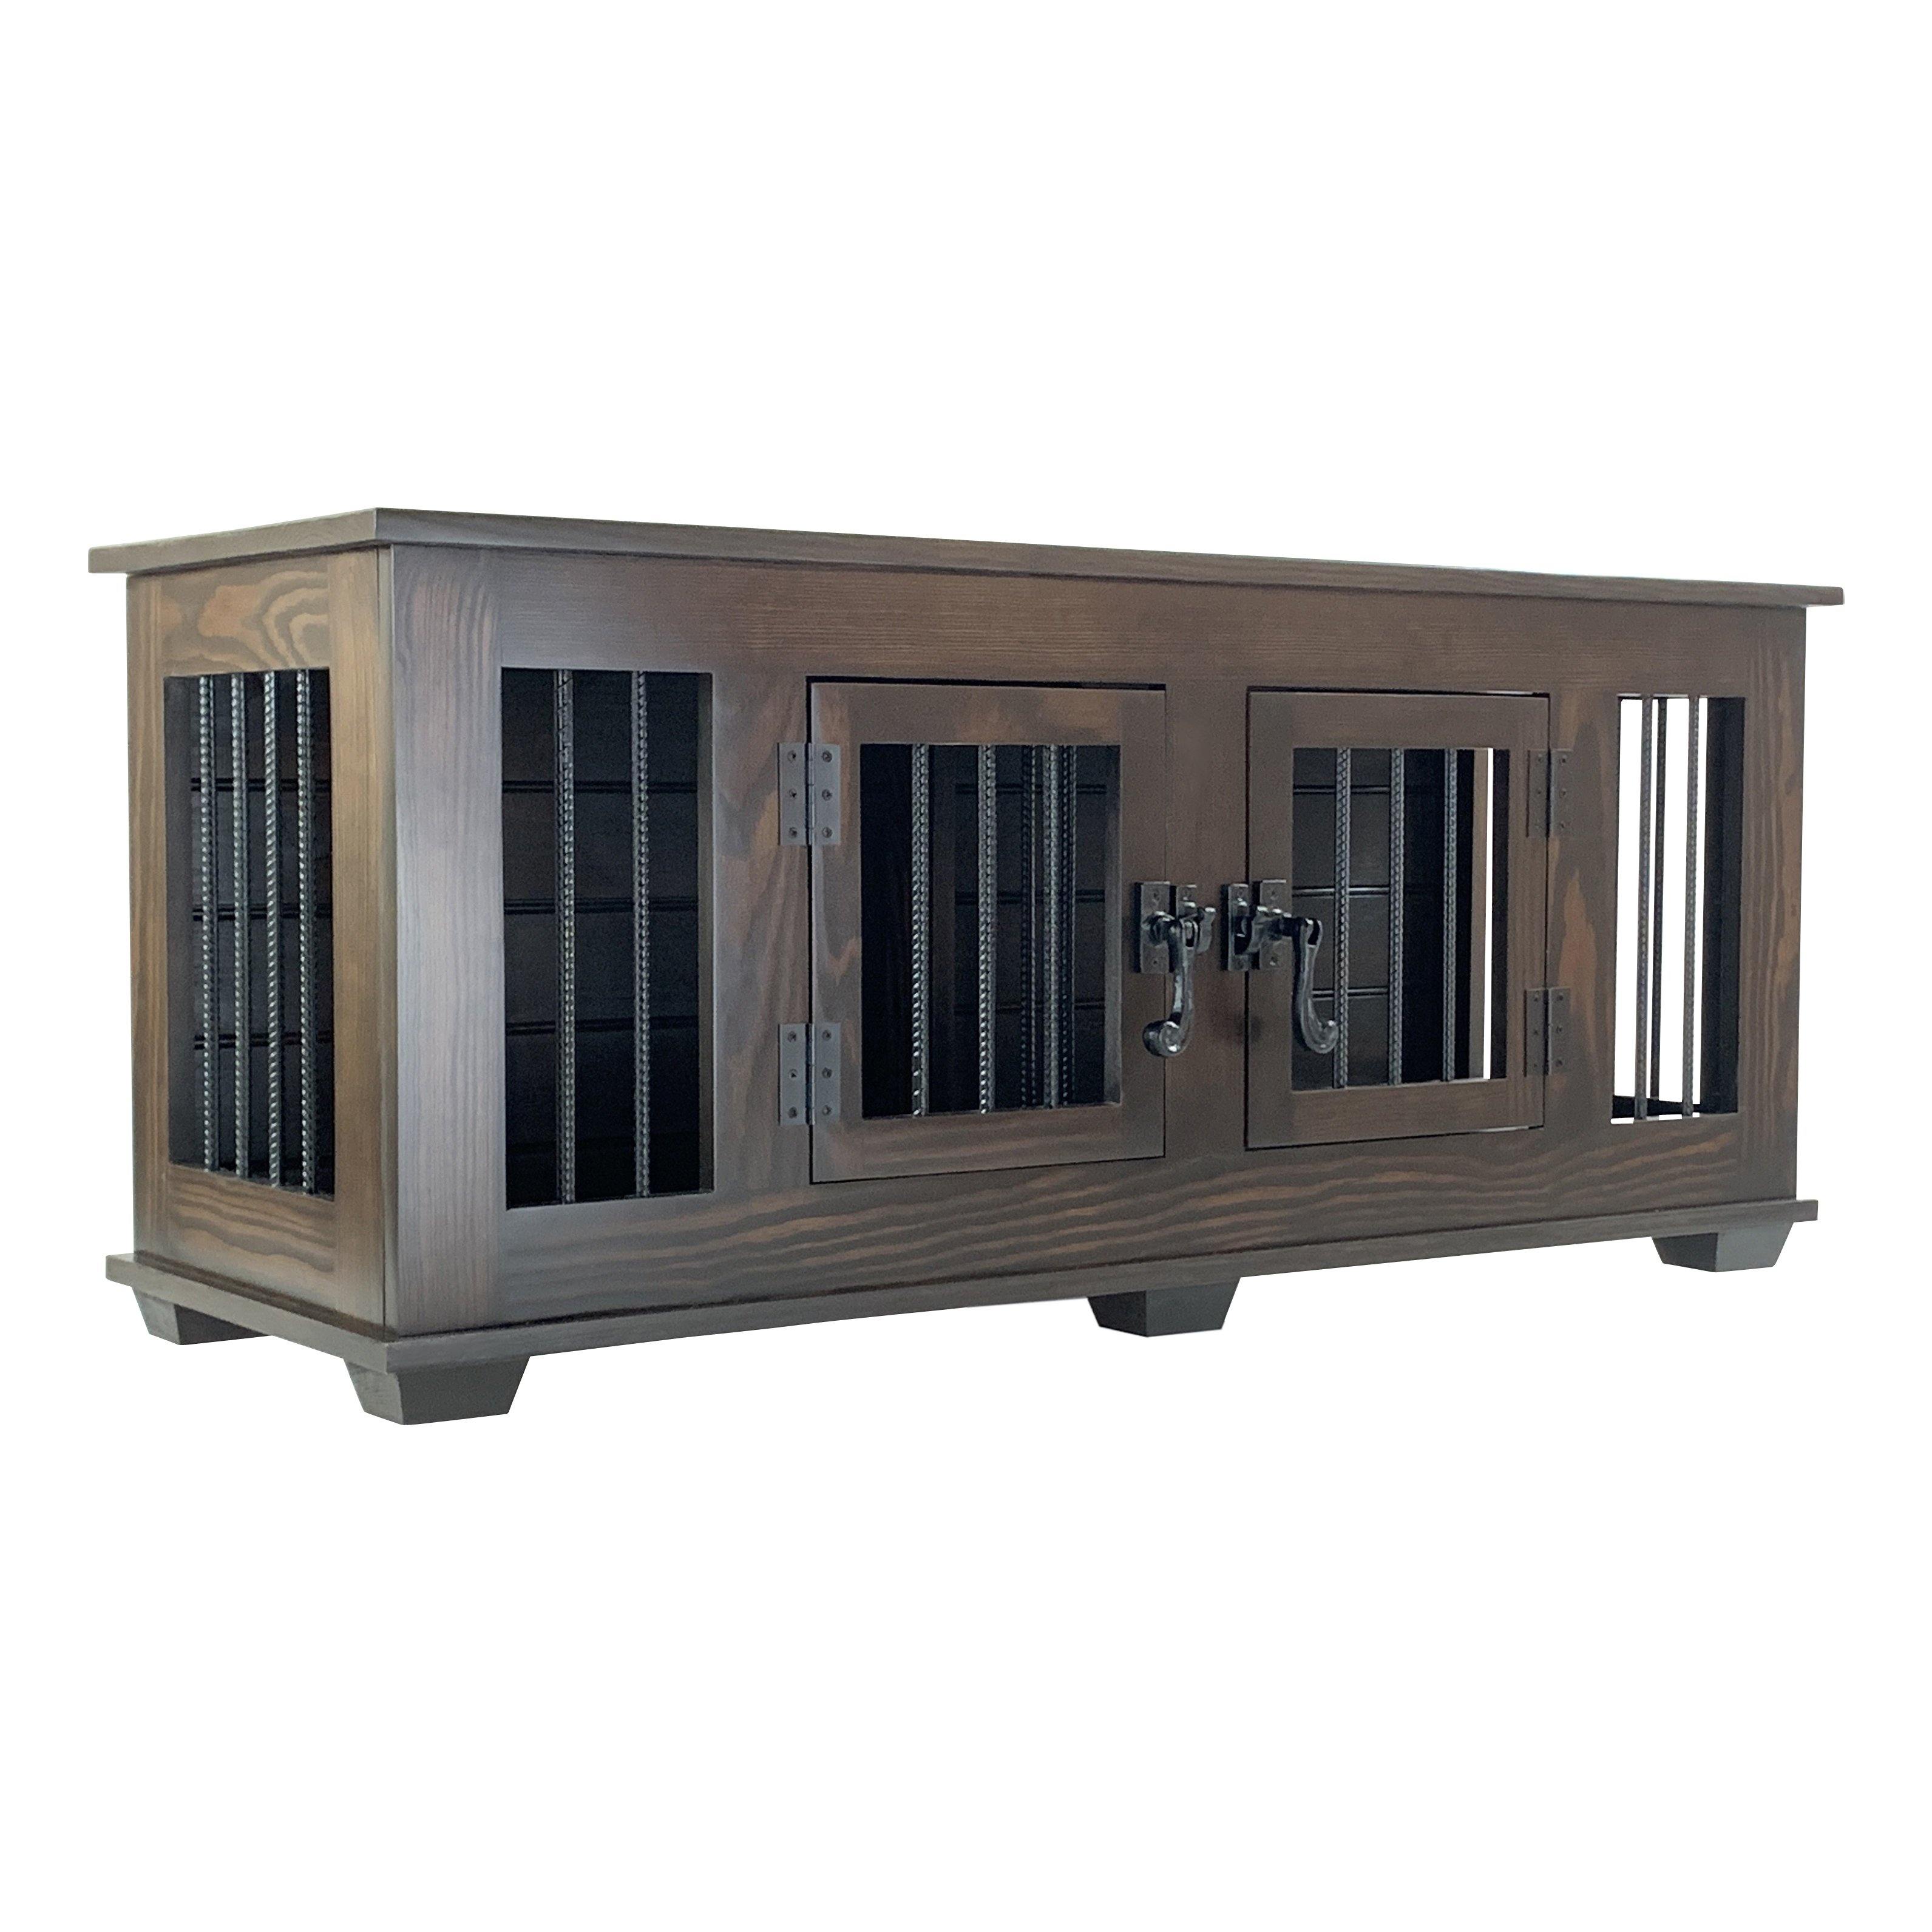 Medium Double Doggie Crate Furniture & Kennel - up to 25 lbs - Carolina Dog Crate Co.